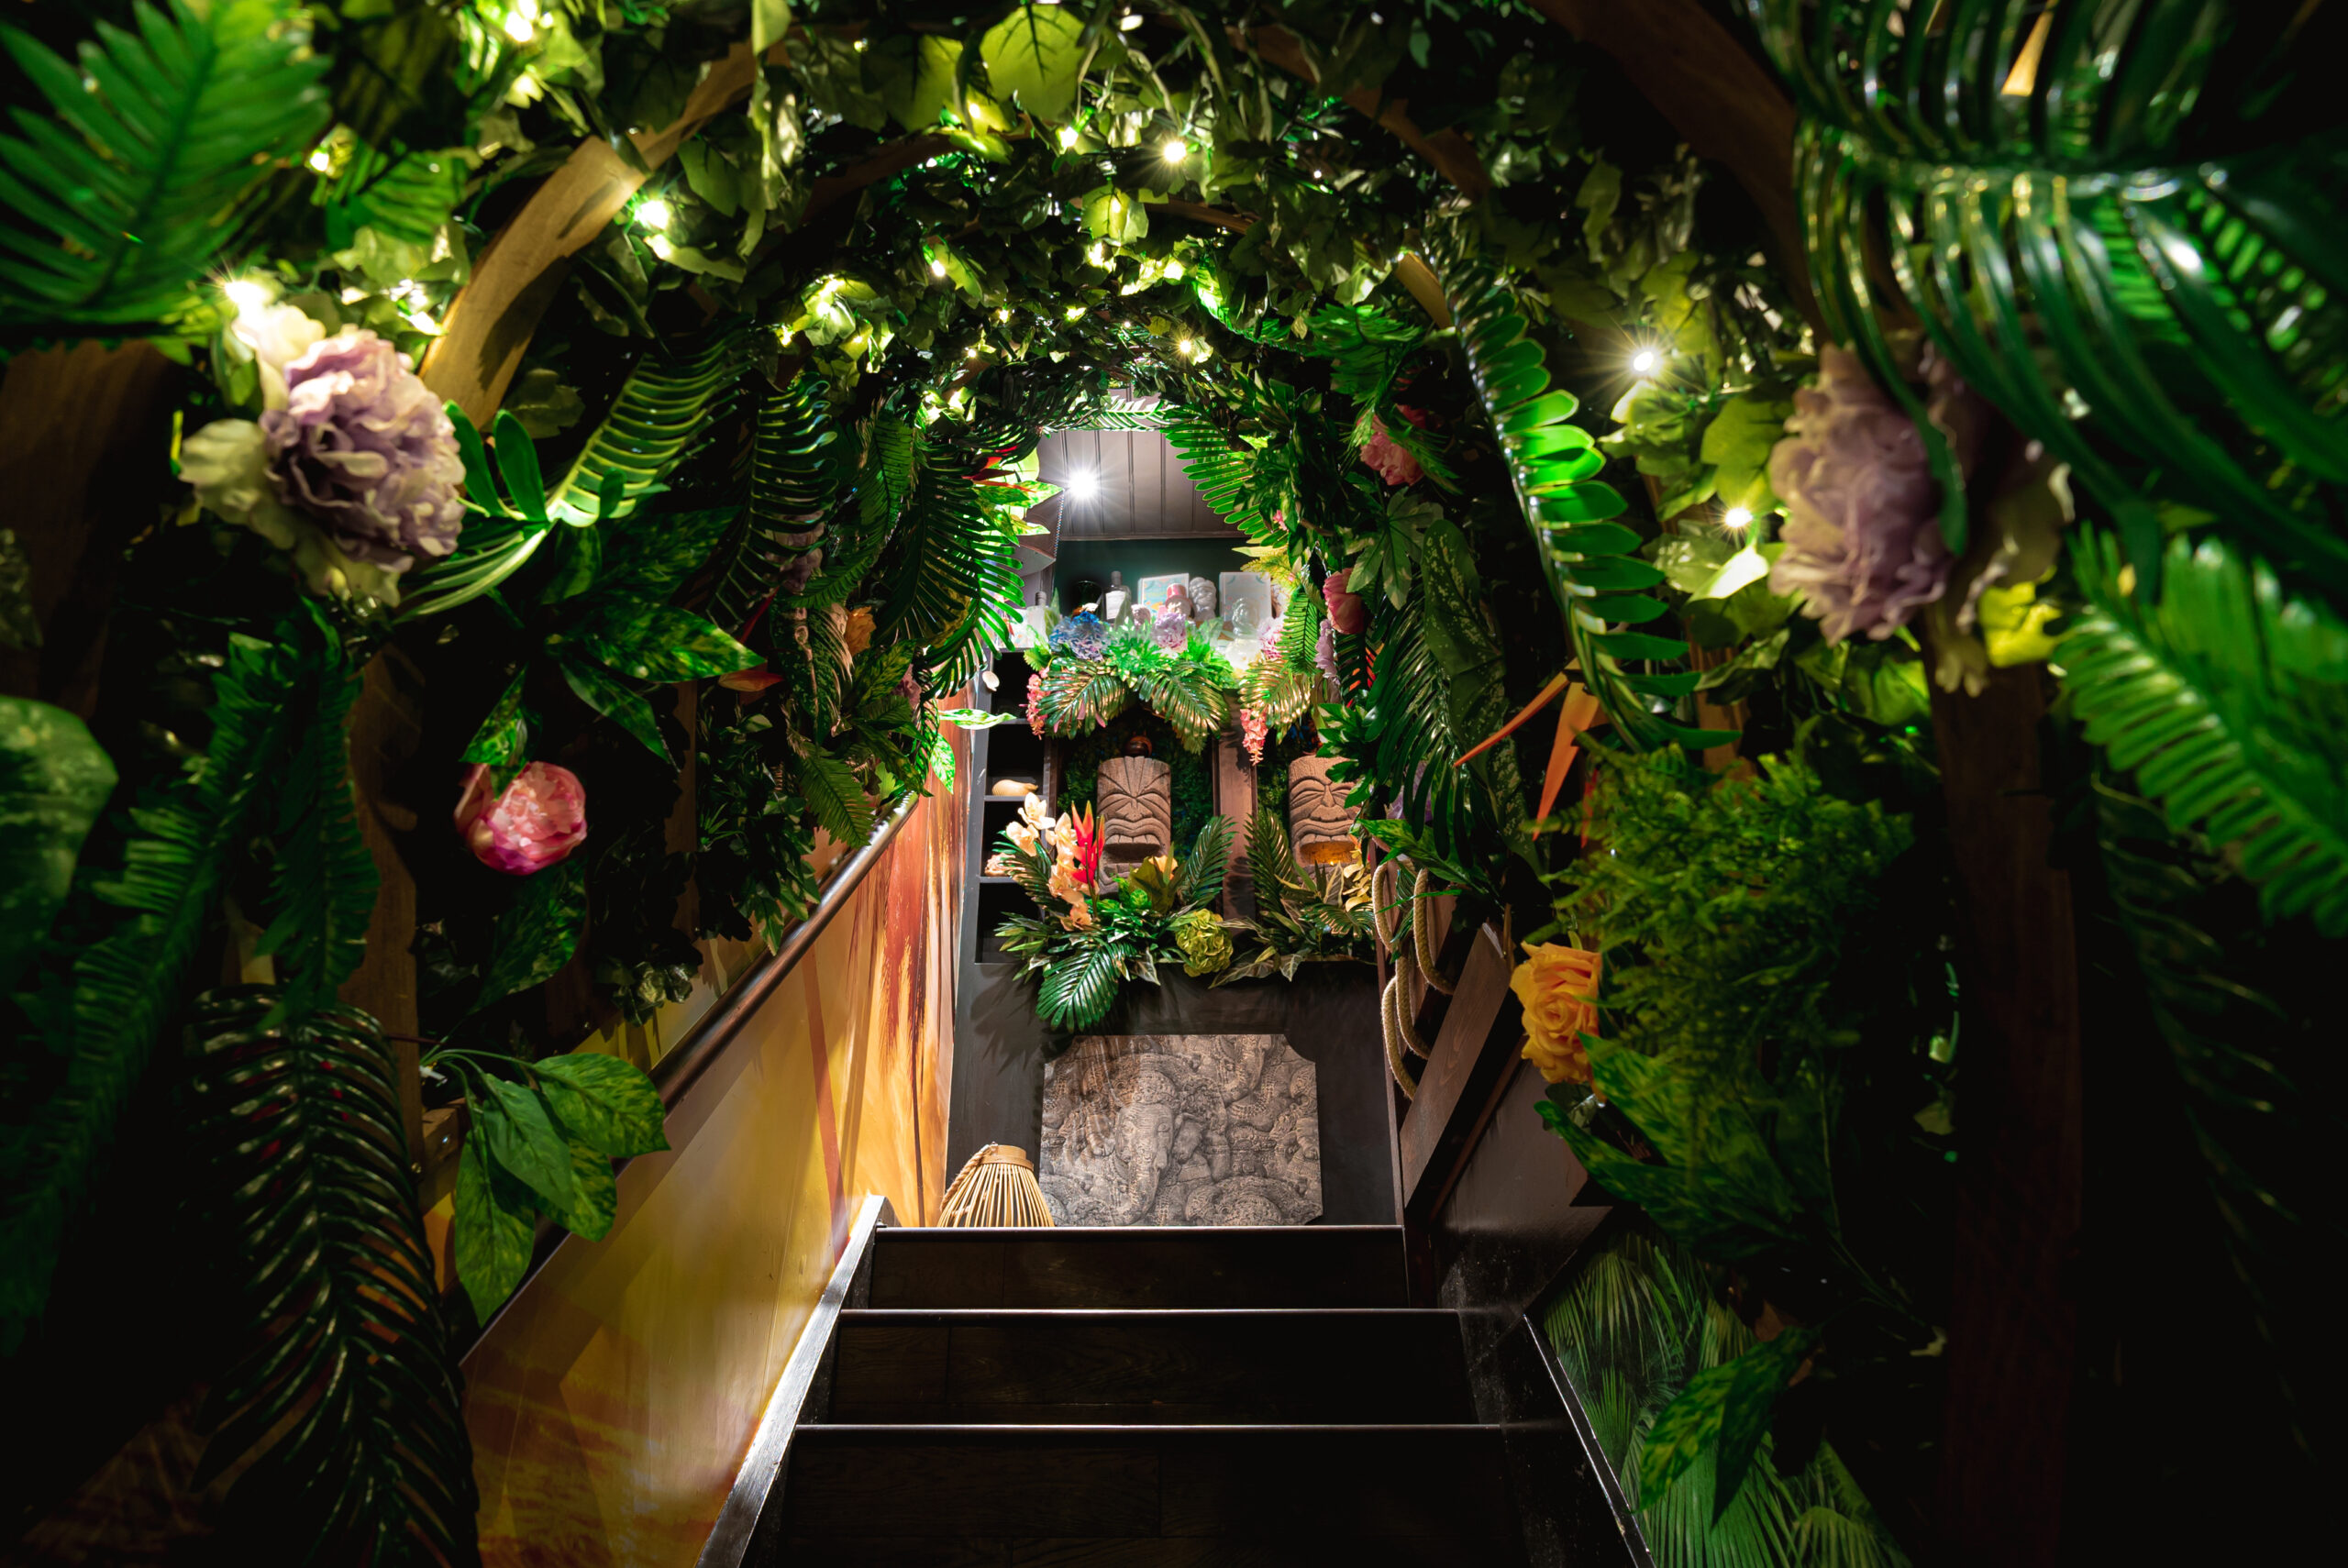 Stairs lead to the second floor of Laki Kane’s tiki bar; the stairwell itself is canopied in lush tropical plants and flowers.